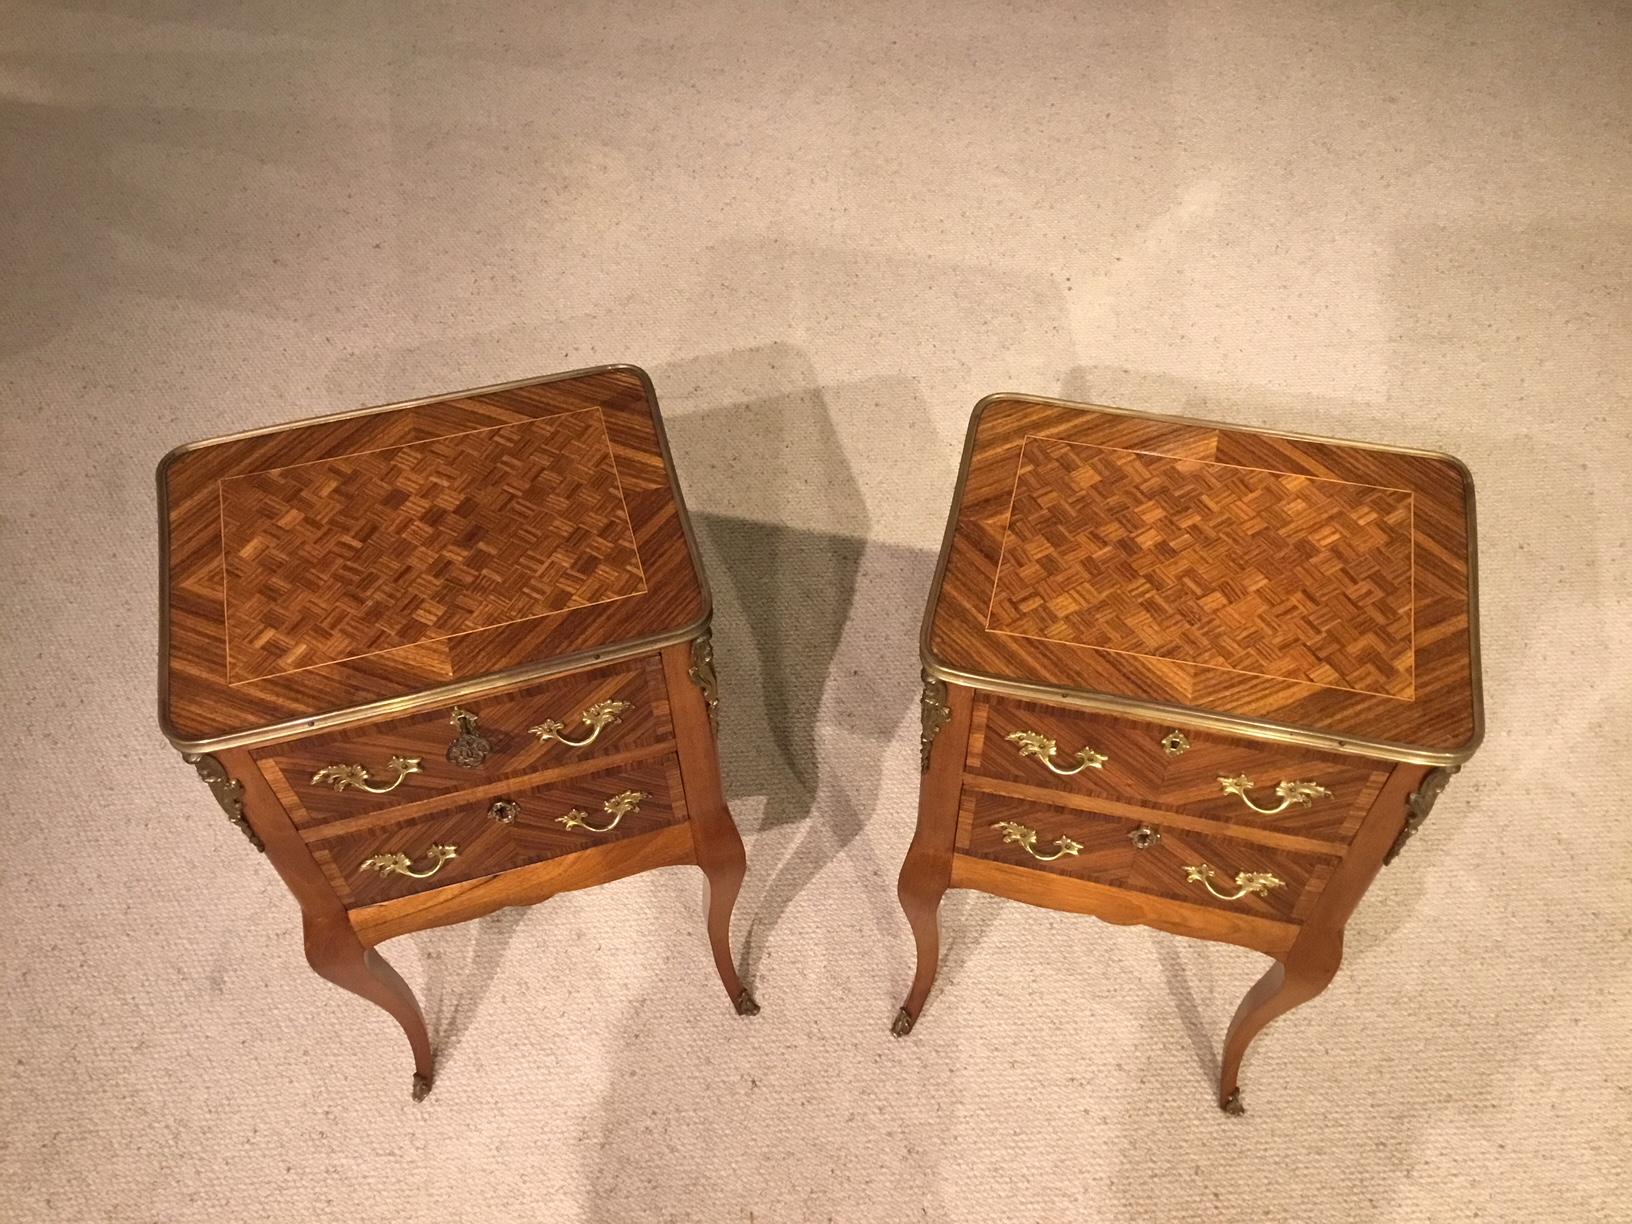 A beautiful pair of kingwood and parquetry French antique bedside cabinets. Each having parquetry inlaid kingwood tops and an ormolu gallery. Having two mahogany lined frieze drawers with cast ormolu handles and escutcheons. With fine quality